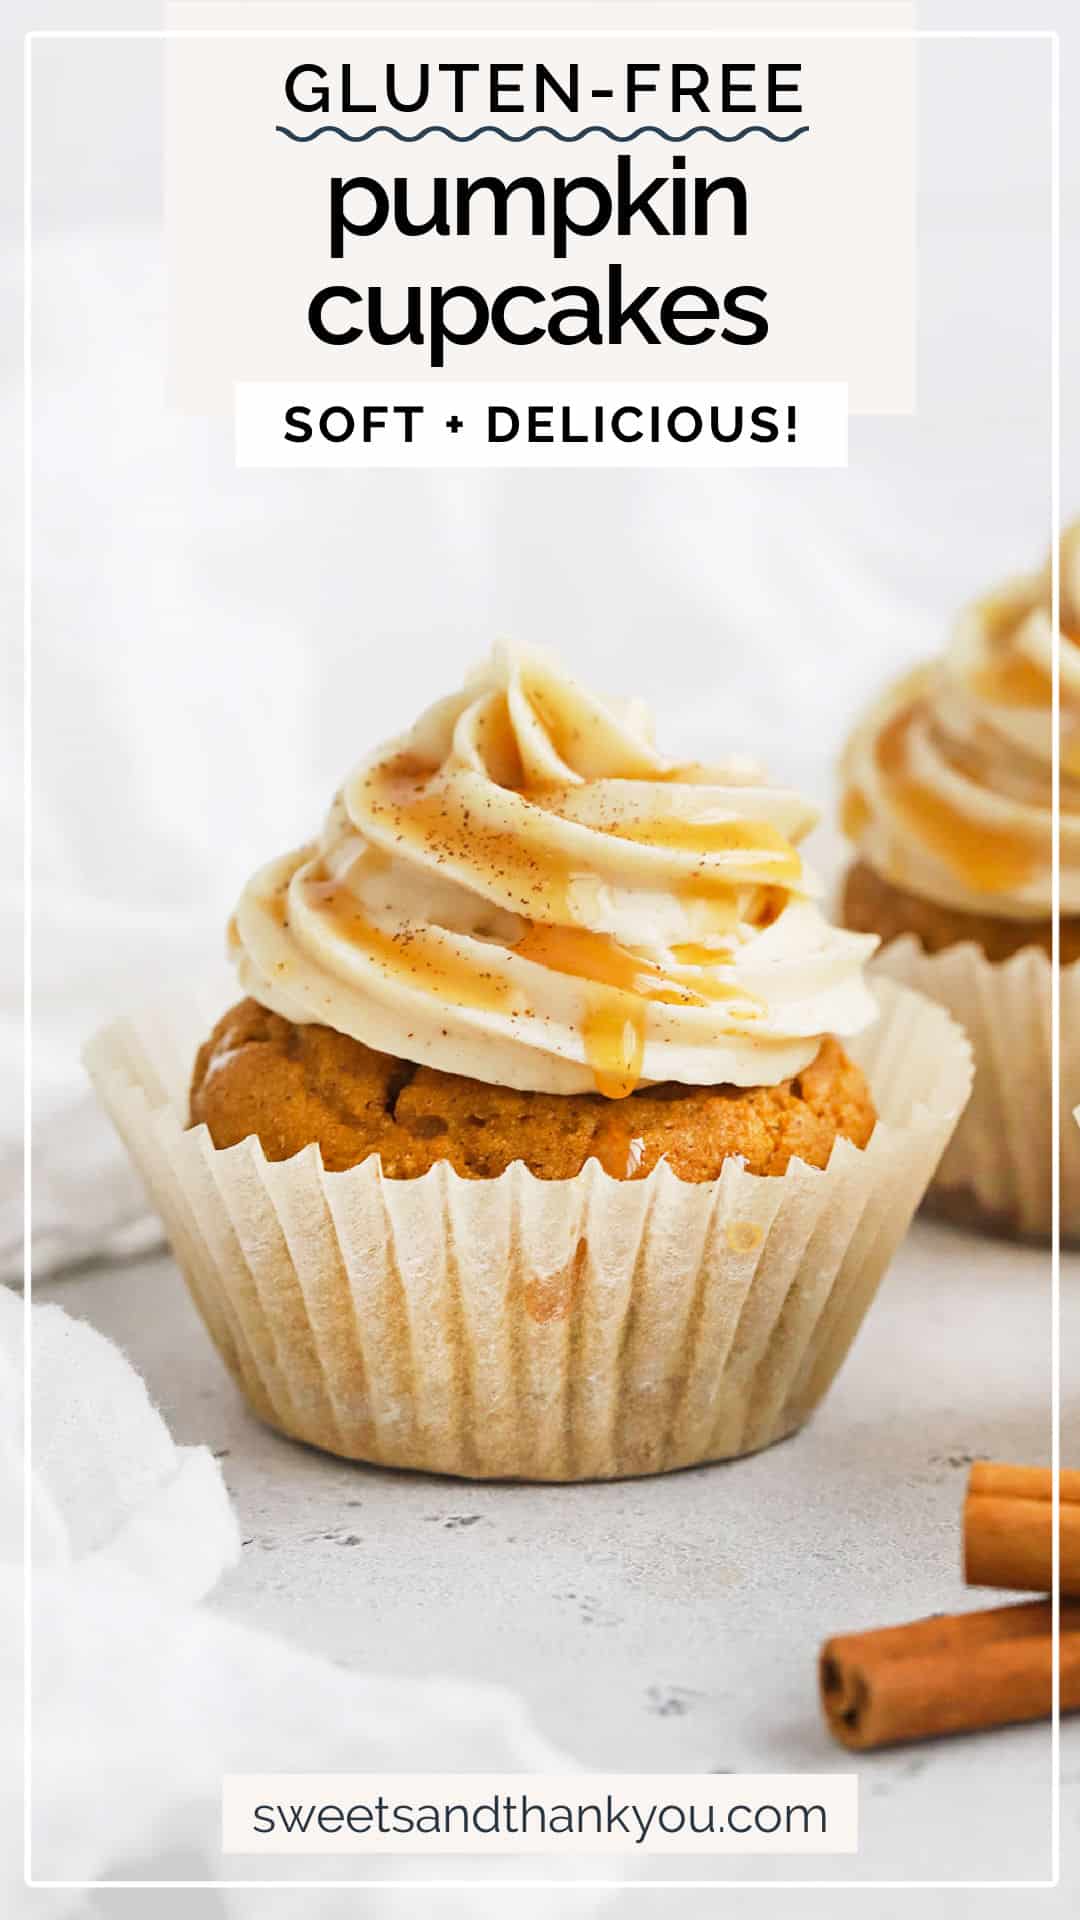 Gluten-Free Pumpkin Cupcakes With Cinnamon Cream Cheese Frosting - My favorite gluten-free pumpkin cupcake recipe with warm spices and a frosting you'll love! // Gluten-Free cupcakes // gluten free pumpkin cake // cinnamon cream cheese frosting recipe // gluten free pumpkin recipes